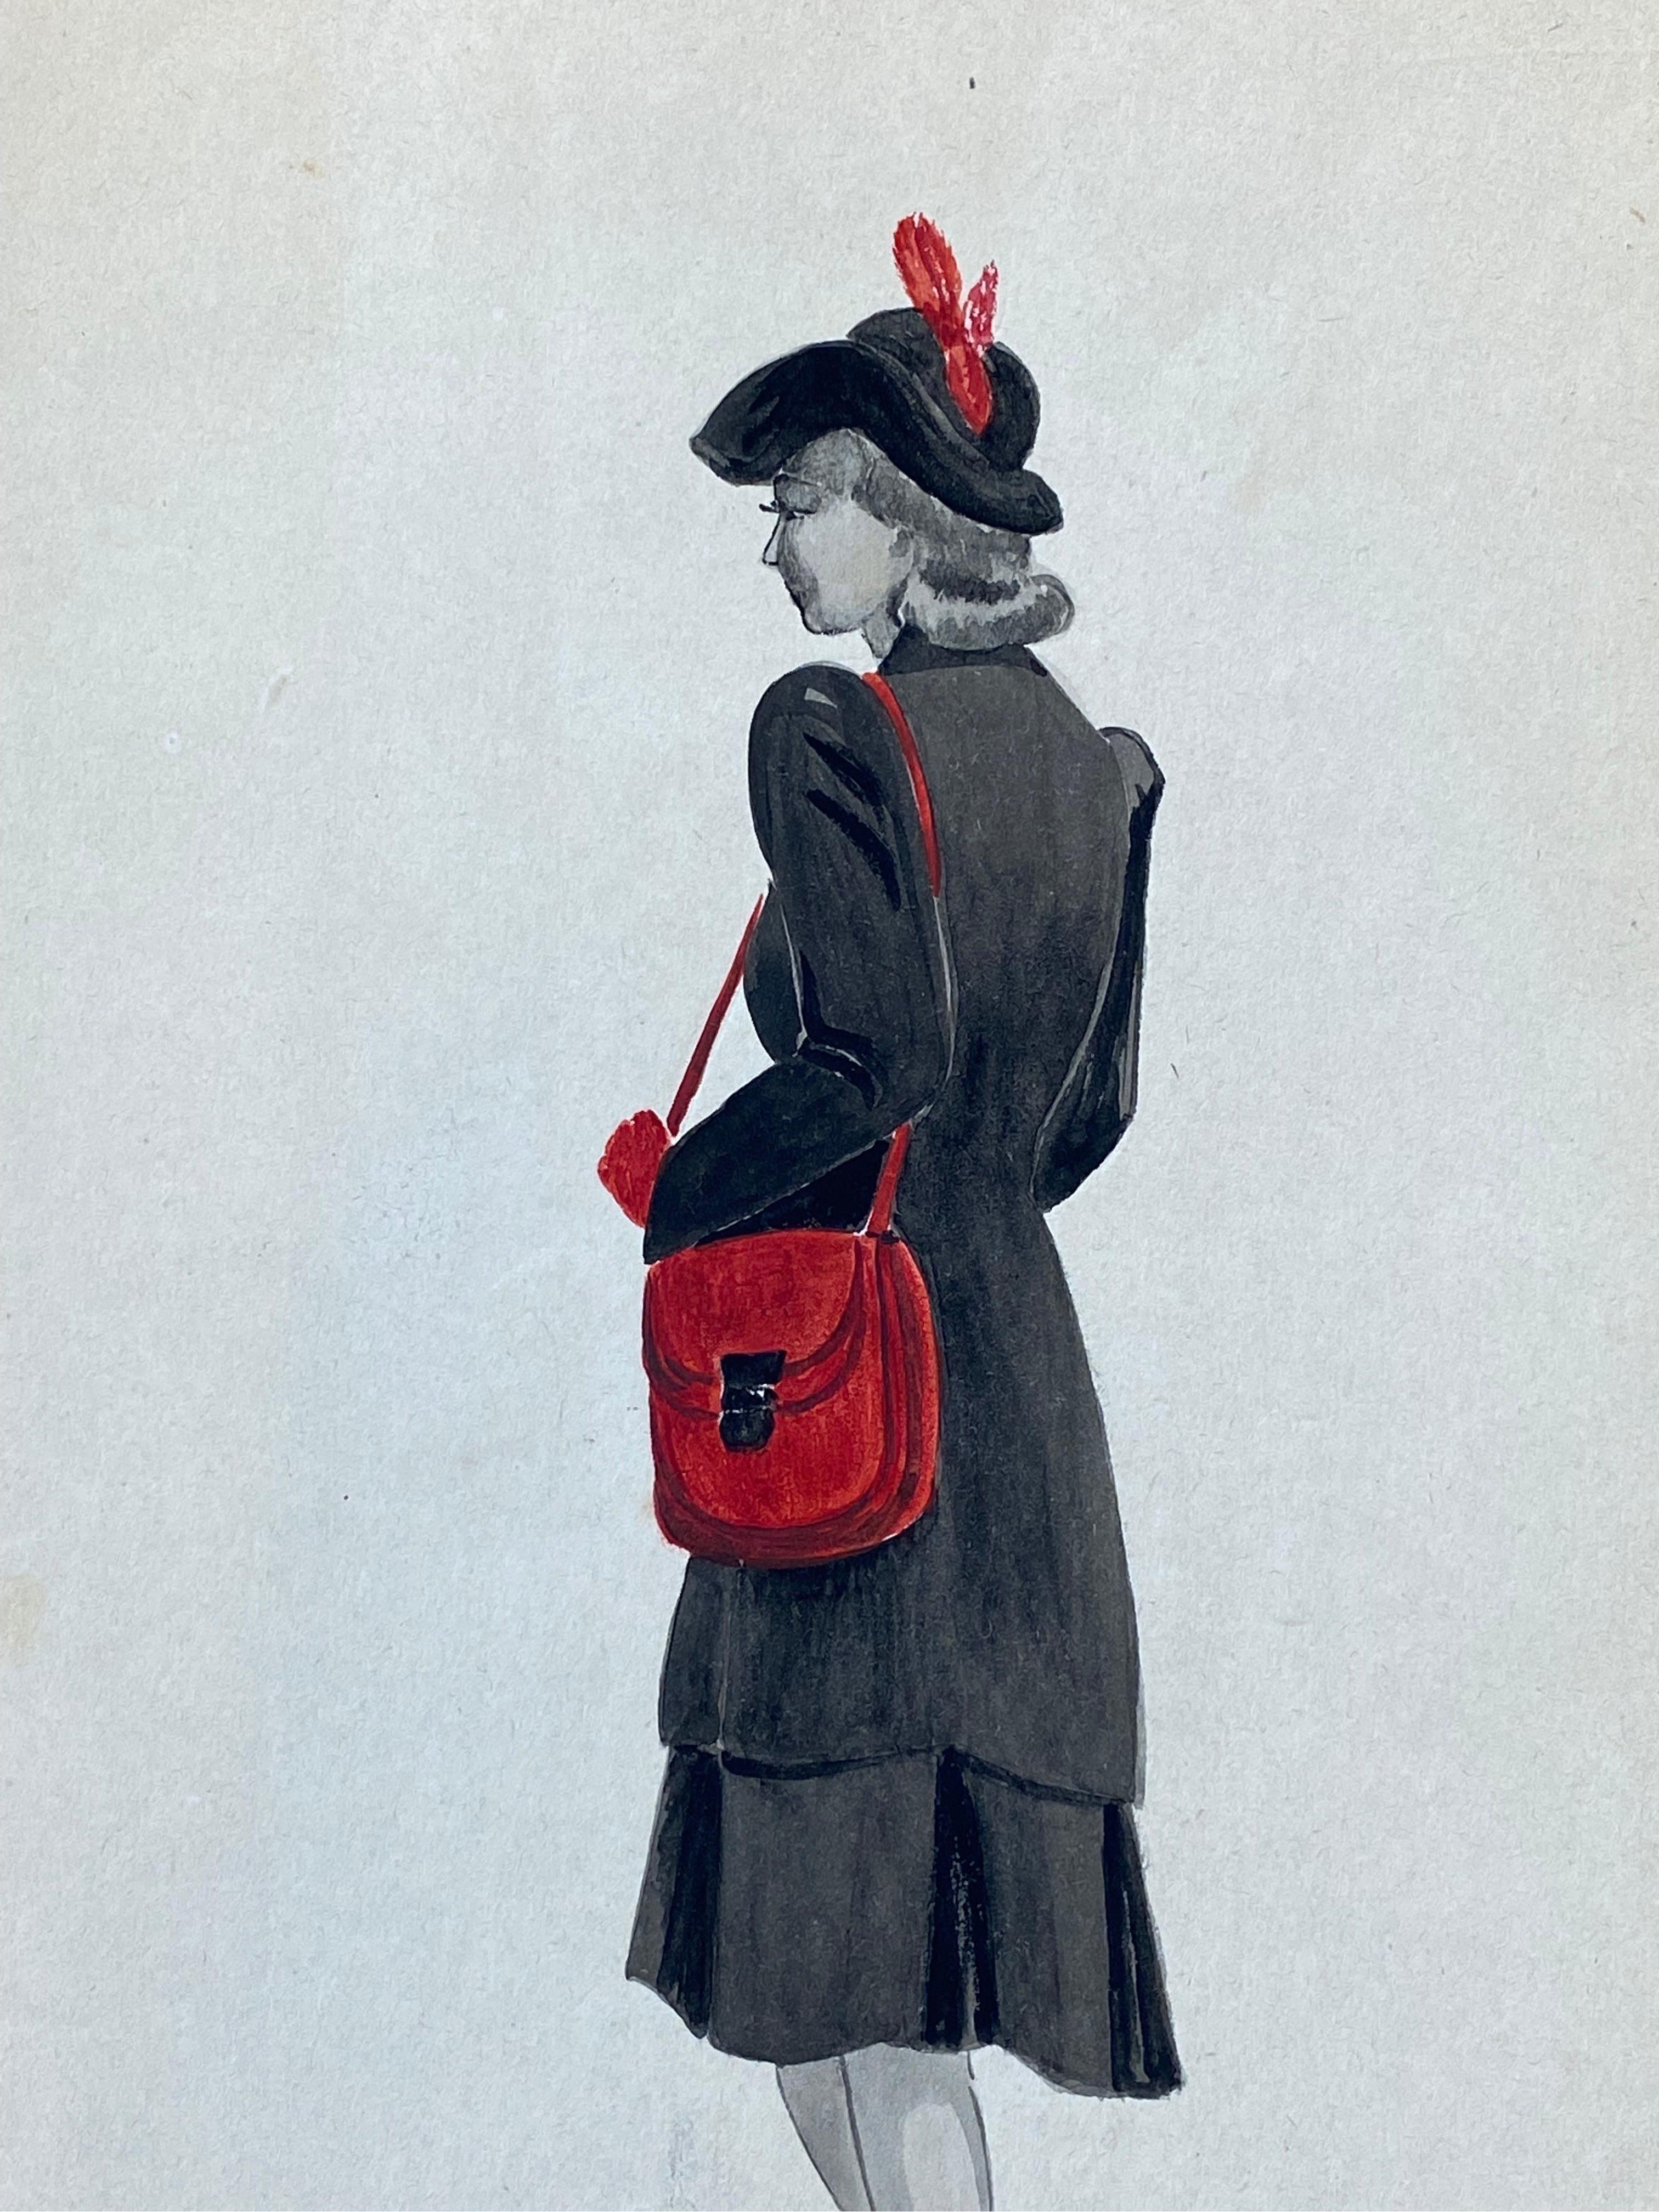 1940's French Fashion Illustration - The Elegant Lady With The Red Features - Painting by Geneviève Thomas